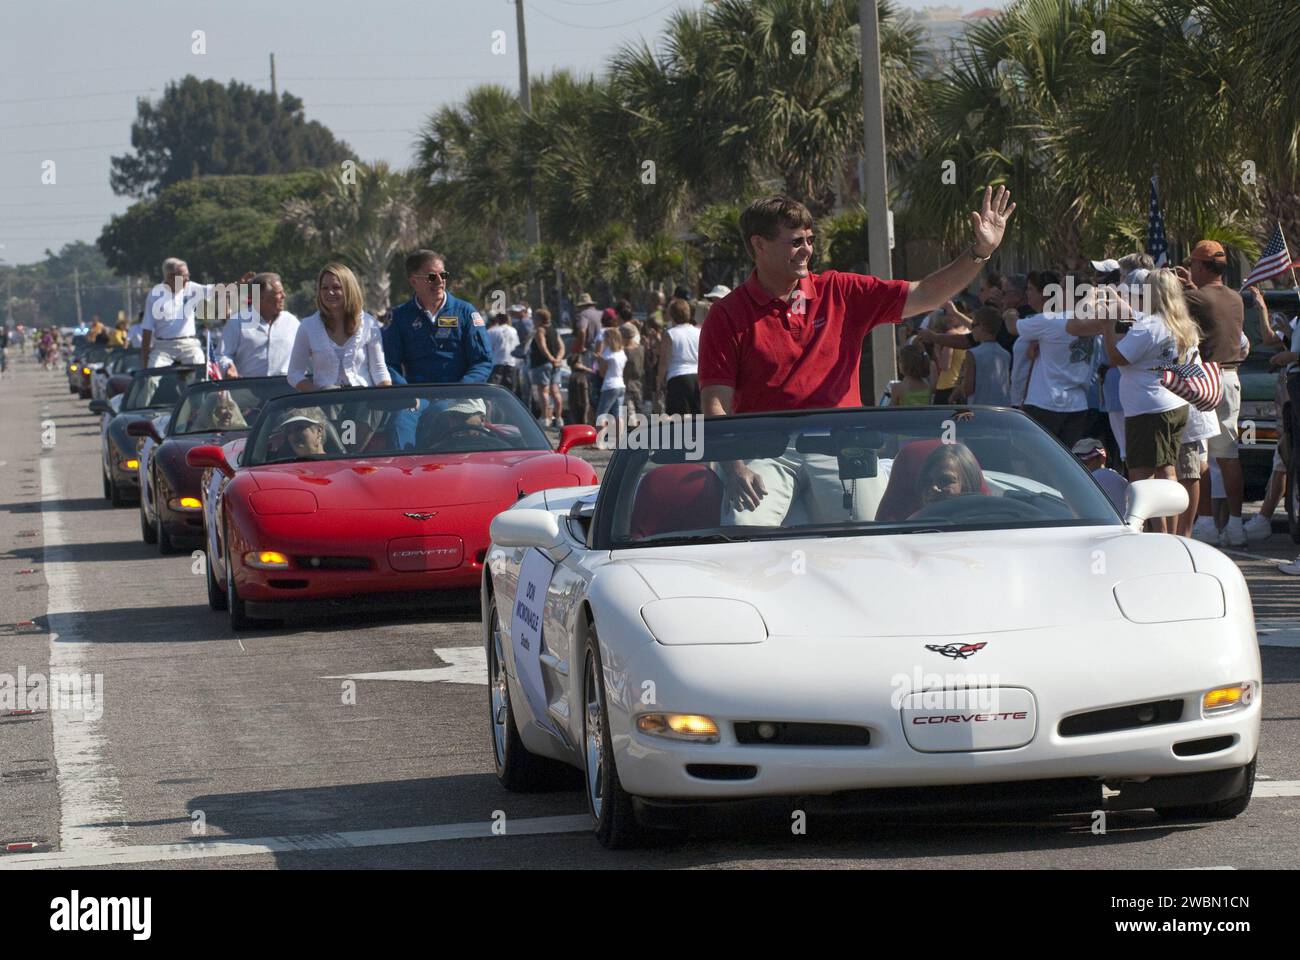 Cape Canaveral, Fla. -- Retired space shuttle astronaut Don McMonagle waves to spectators from a vintage Chevrolet Corvette during a commemorative parade in Cocoa Beach, Fla.    A group of current and retired NASA astronauts gathered in Cocoa Beach to commemorate NASA’s 50 years of accomplishments and to honor astronaut Alan Shepard’s Mercury/Freedom 7 suborbital flight May 5, 1961.The event was marked by a parade, with the astronauts riding in a fleet of Chevrolet Corvettes that corresponded with the time period of their space missions. Members of the Cape Kennedy Corvette Club, a group estab Stock Photo